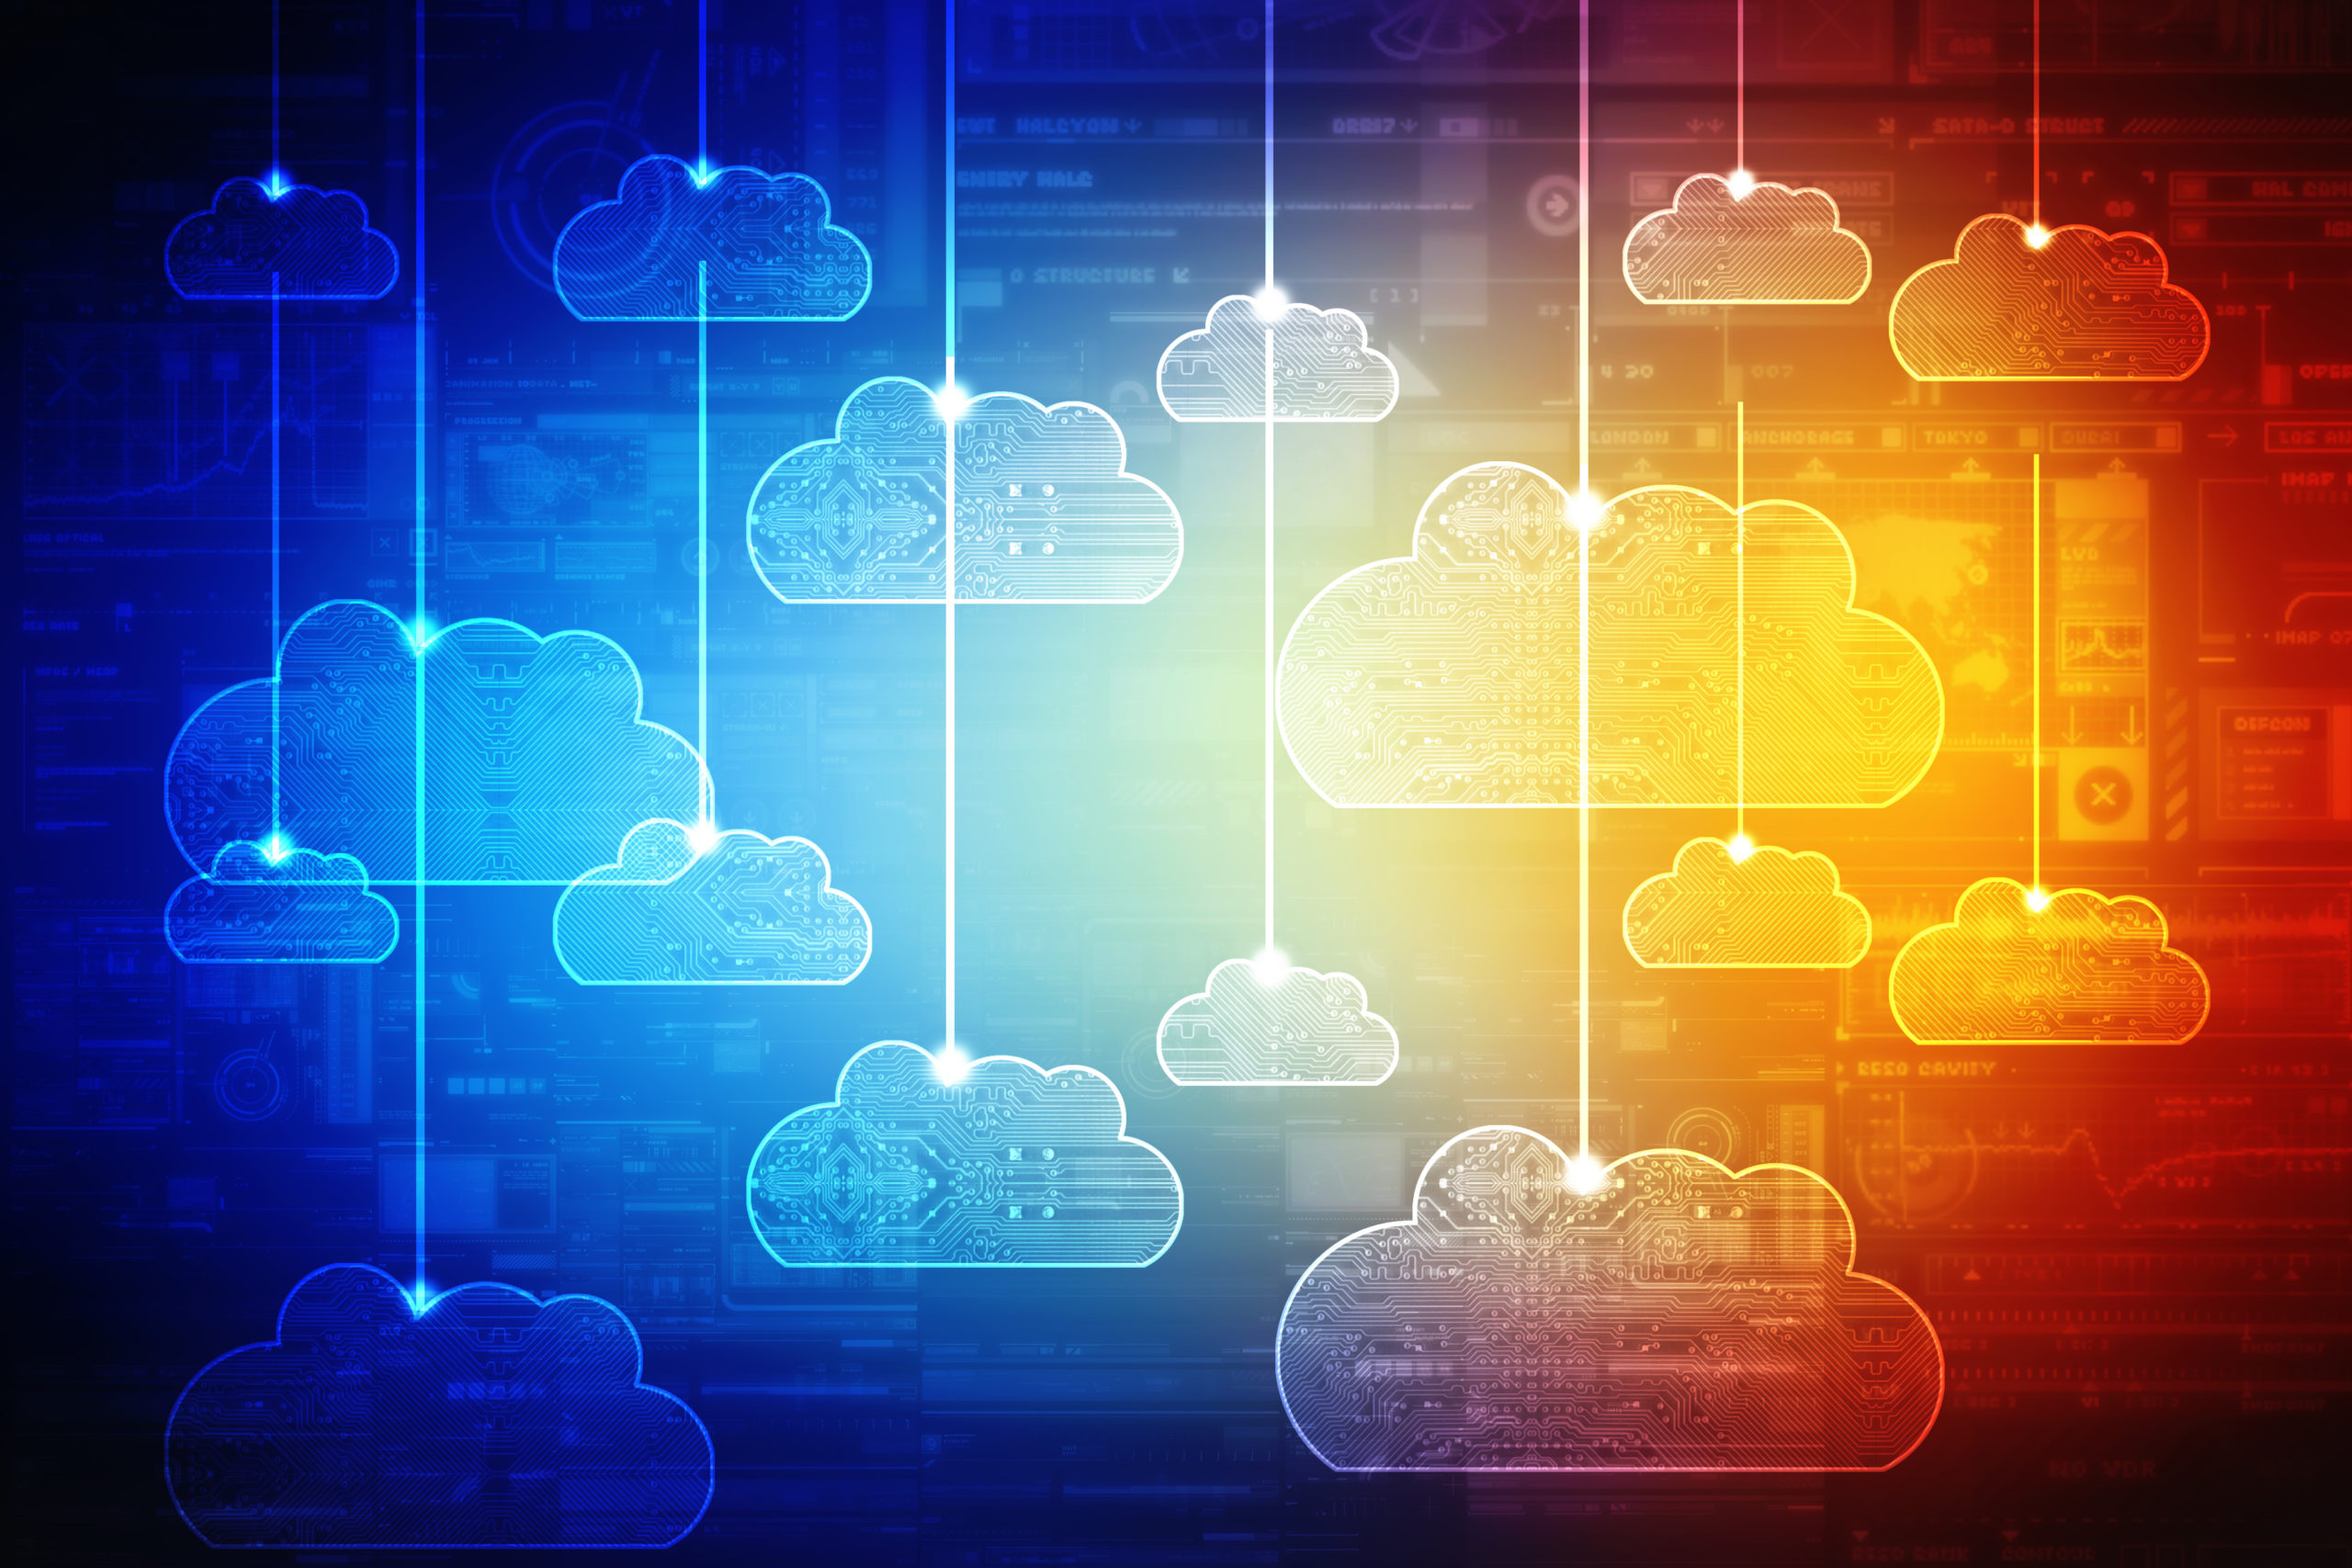 Cloud icons on a blue to red gradated background